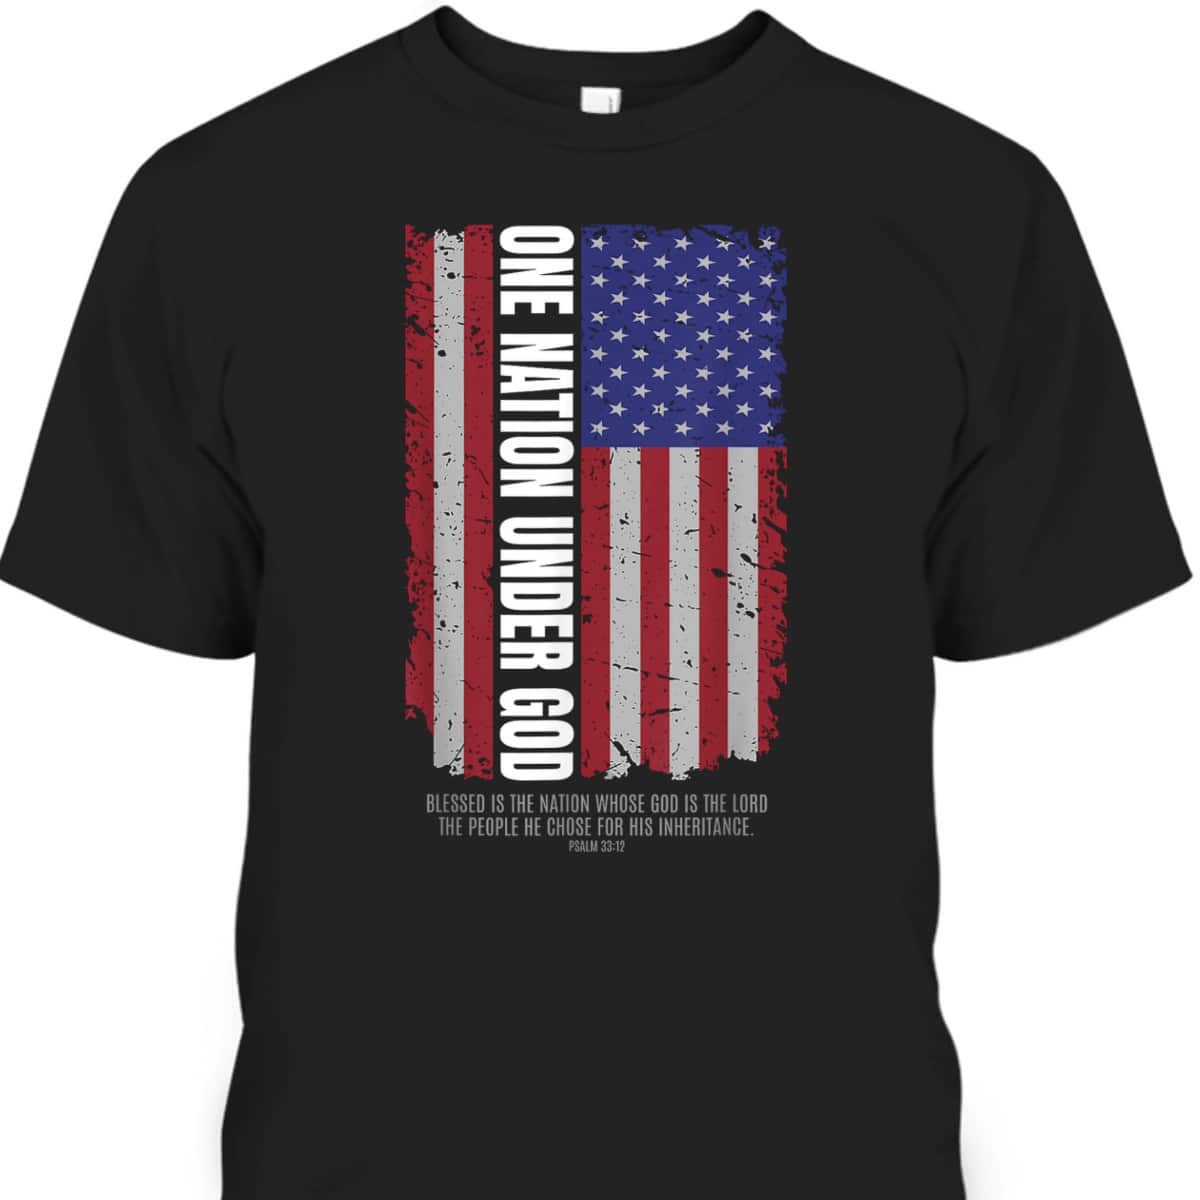 Religious Freedom One Nation Under God Bible Verse T-Shirt 4th Of July Independence Day